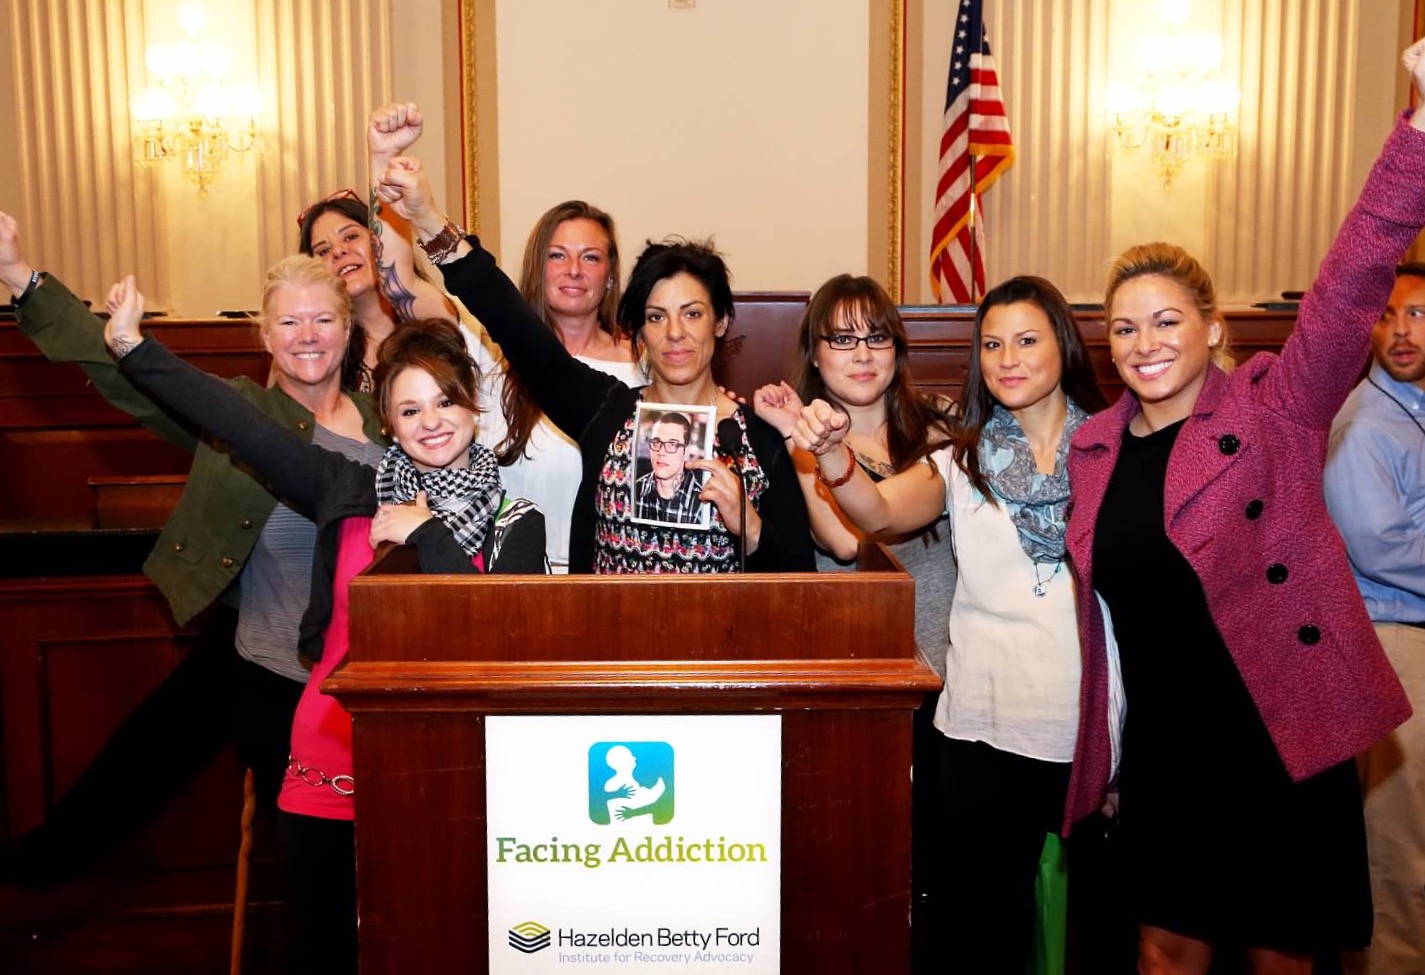 Alaskans were part of the UNITE to Face Addiction Rally in Washington, D.C.: Kim Whitaker, Julee Douglas, Samantha Garton, Terria Walters, Kara Nelson, Delia Williams, Jennifer Mcallister and Christina Love inside a congressional office building in D.C. in October. Nelson is holding a picture of Christopher Seaman, the son of Walters who was murdered in Mat-Su in June. (Photo courtesy Kara Nelson)